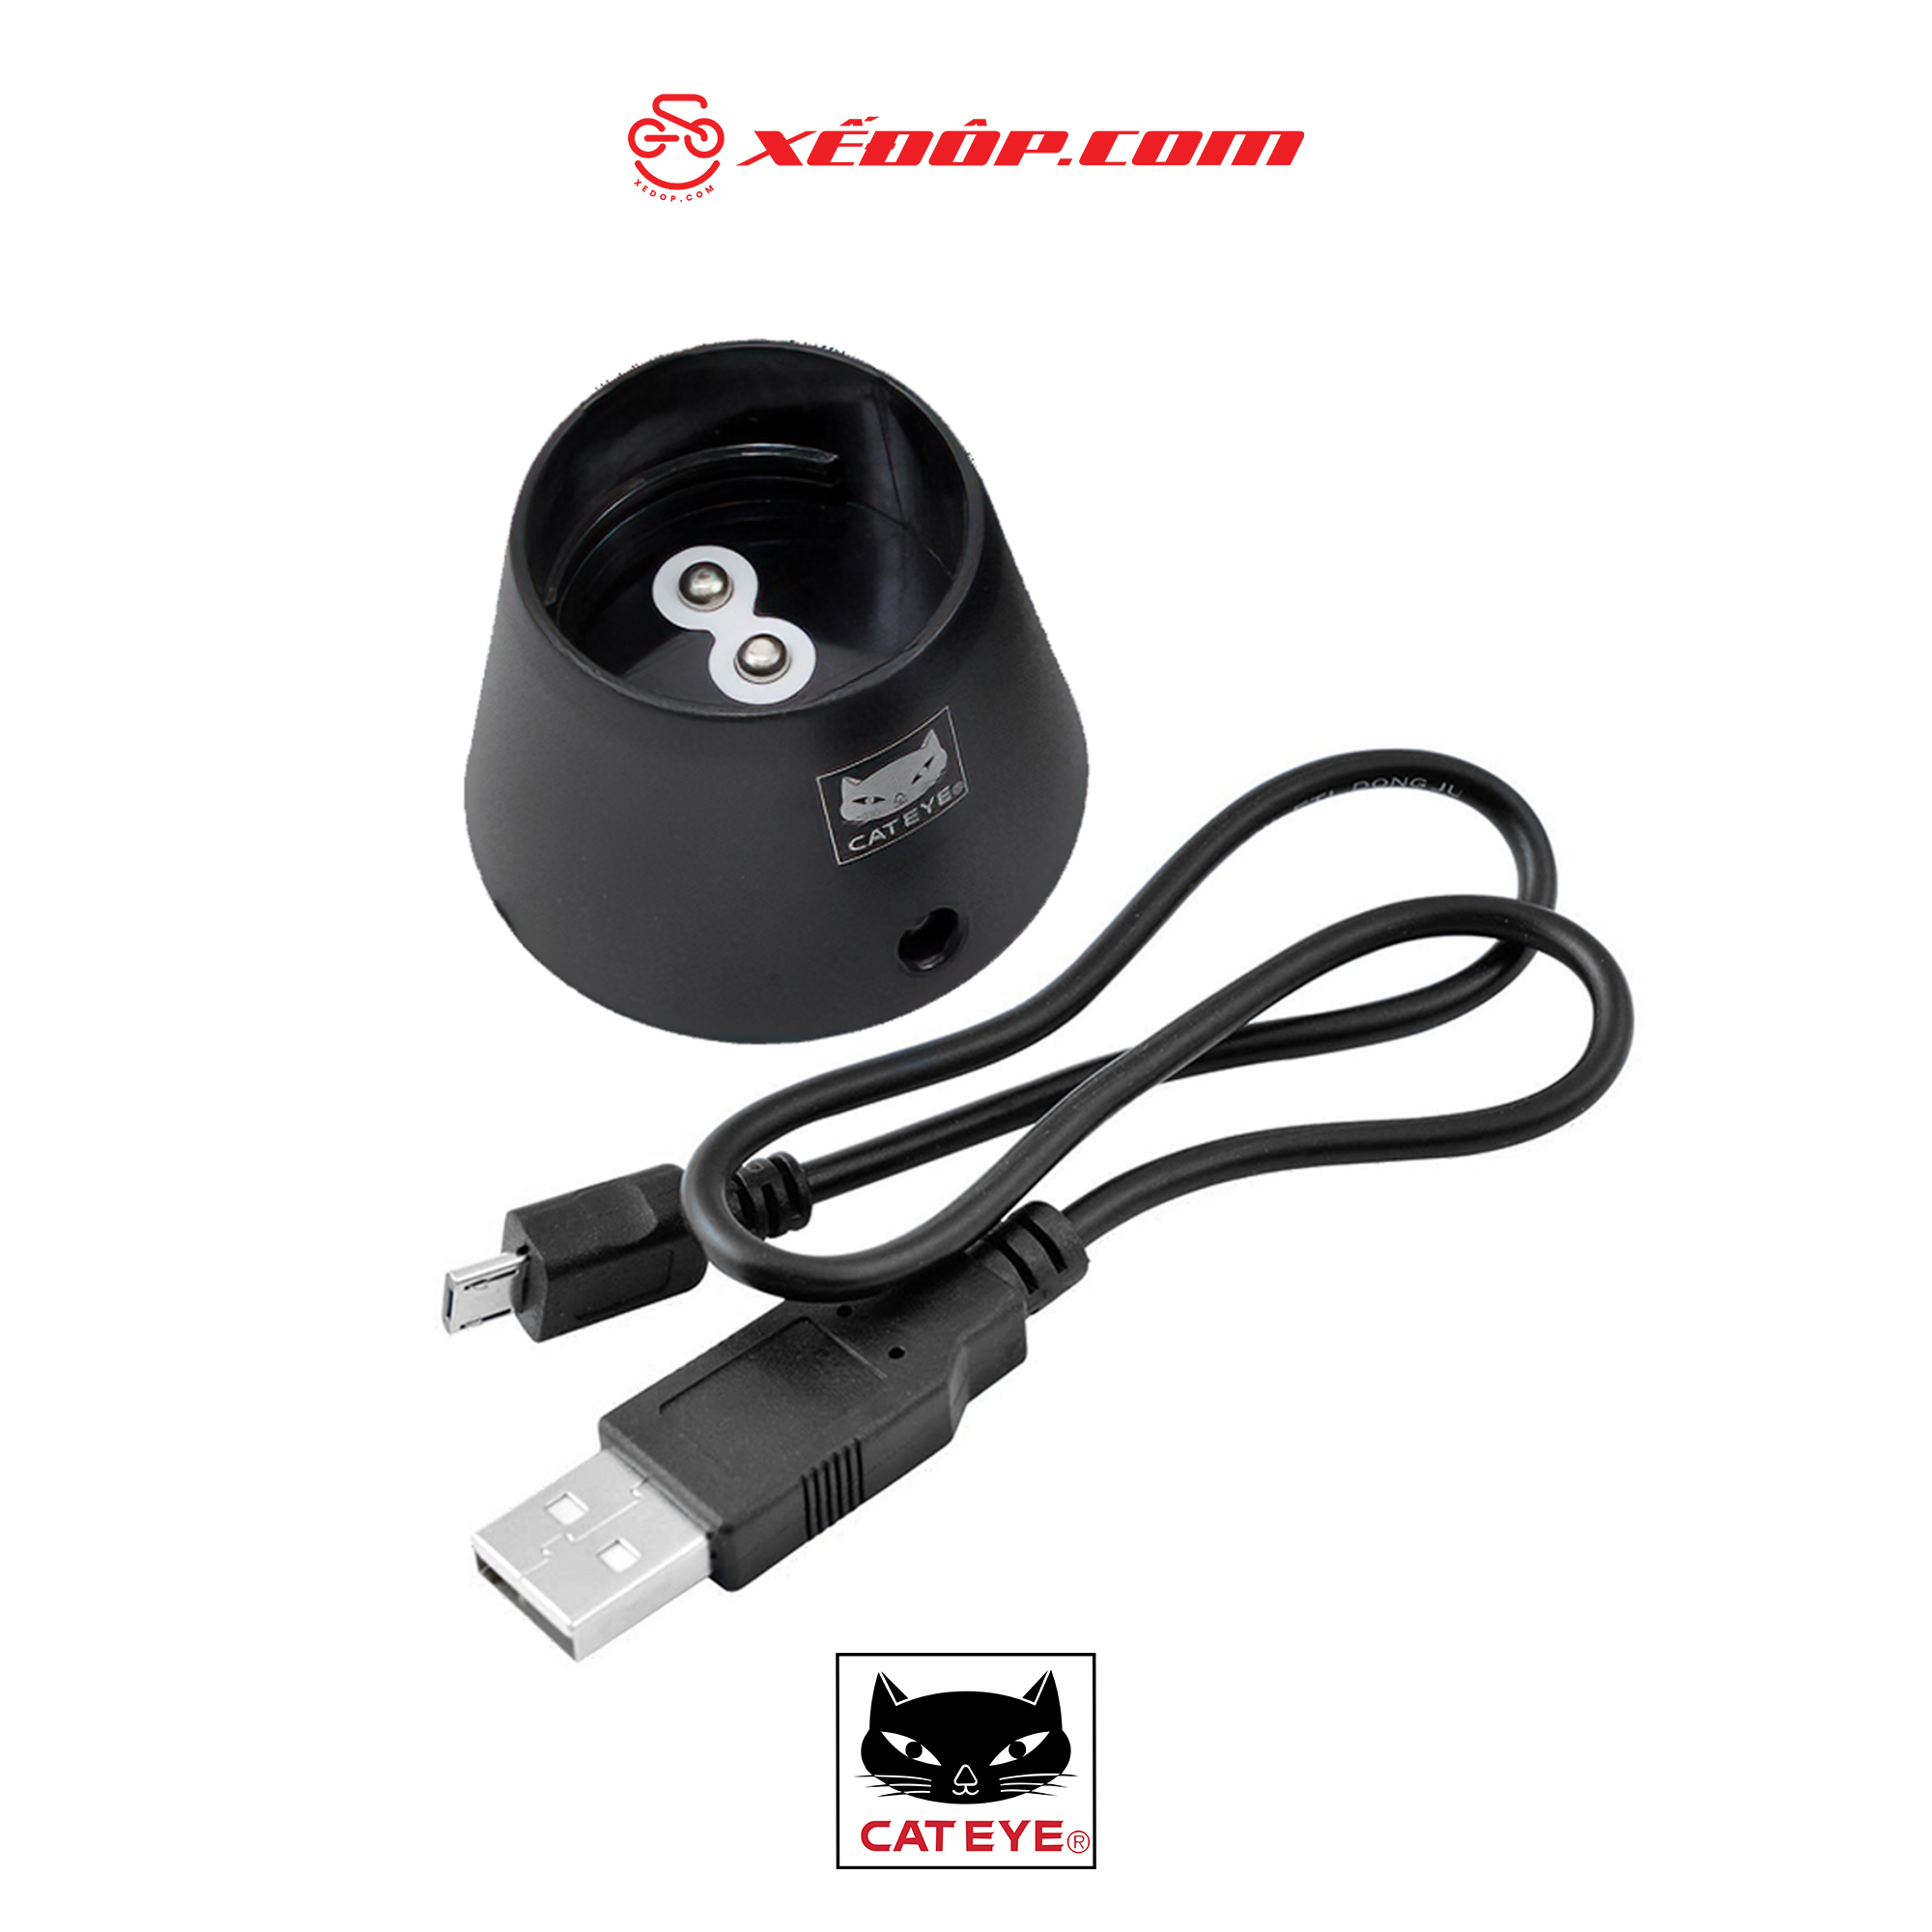 CATEYE (CRA-001) USB CABLE INCLUDED